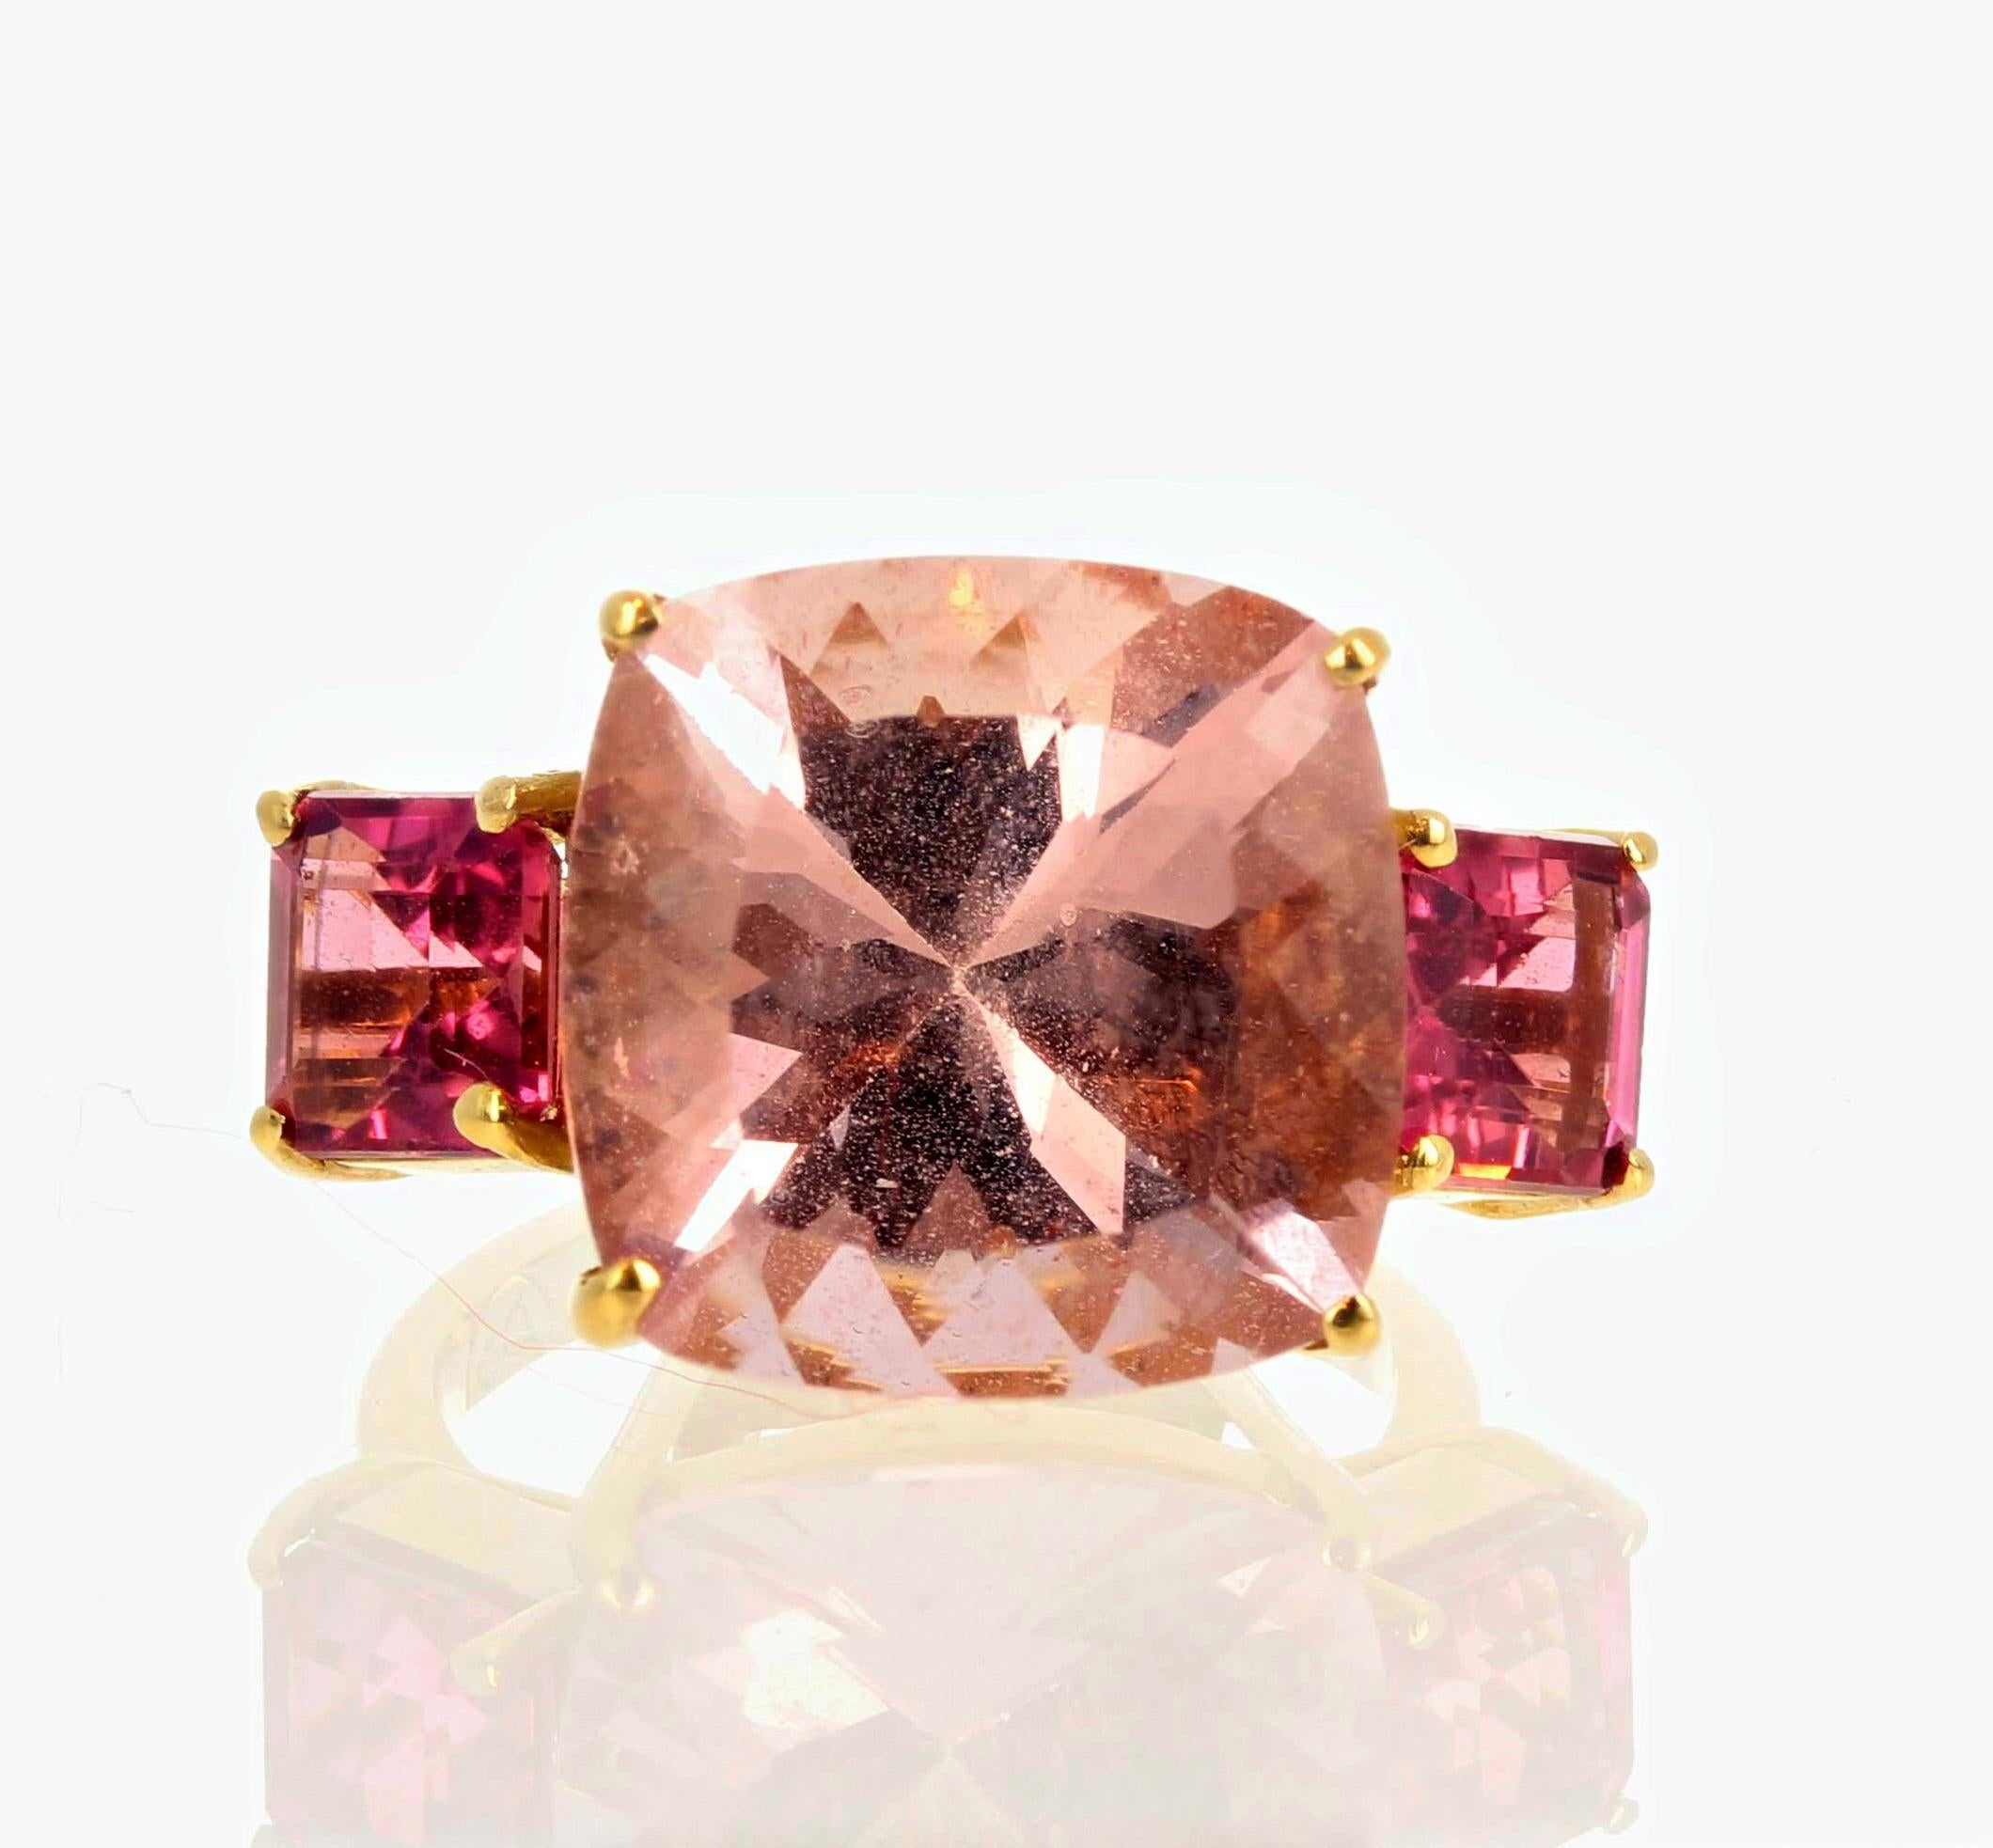 AJD Absolutely Magnificent 8.89 Ct Blush Morganite & Tourmaline Gold Ring 2